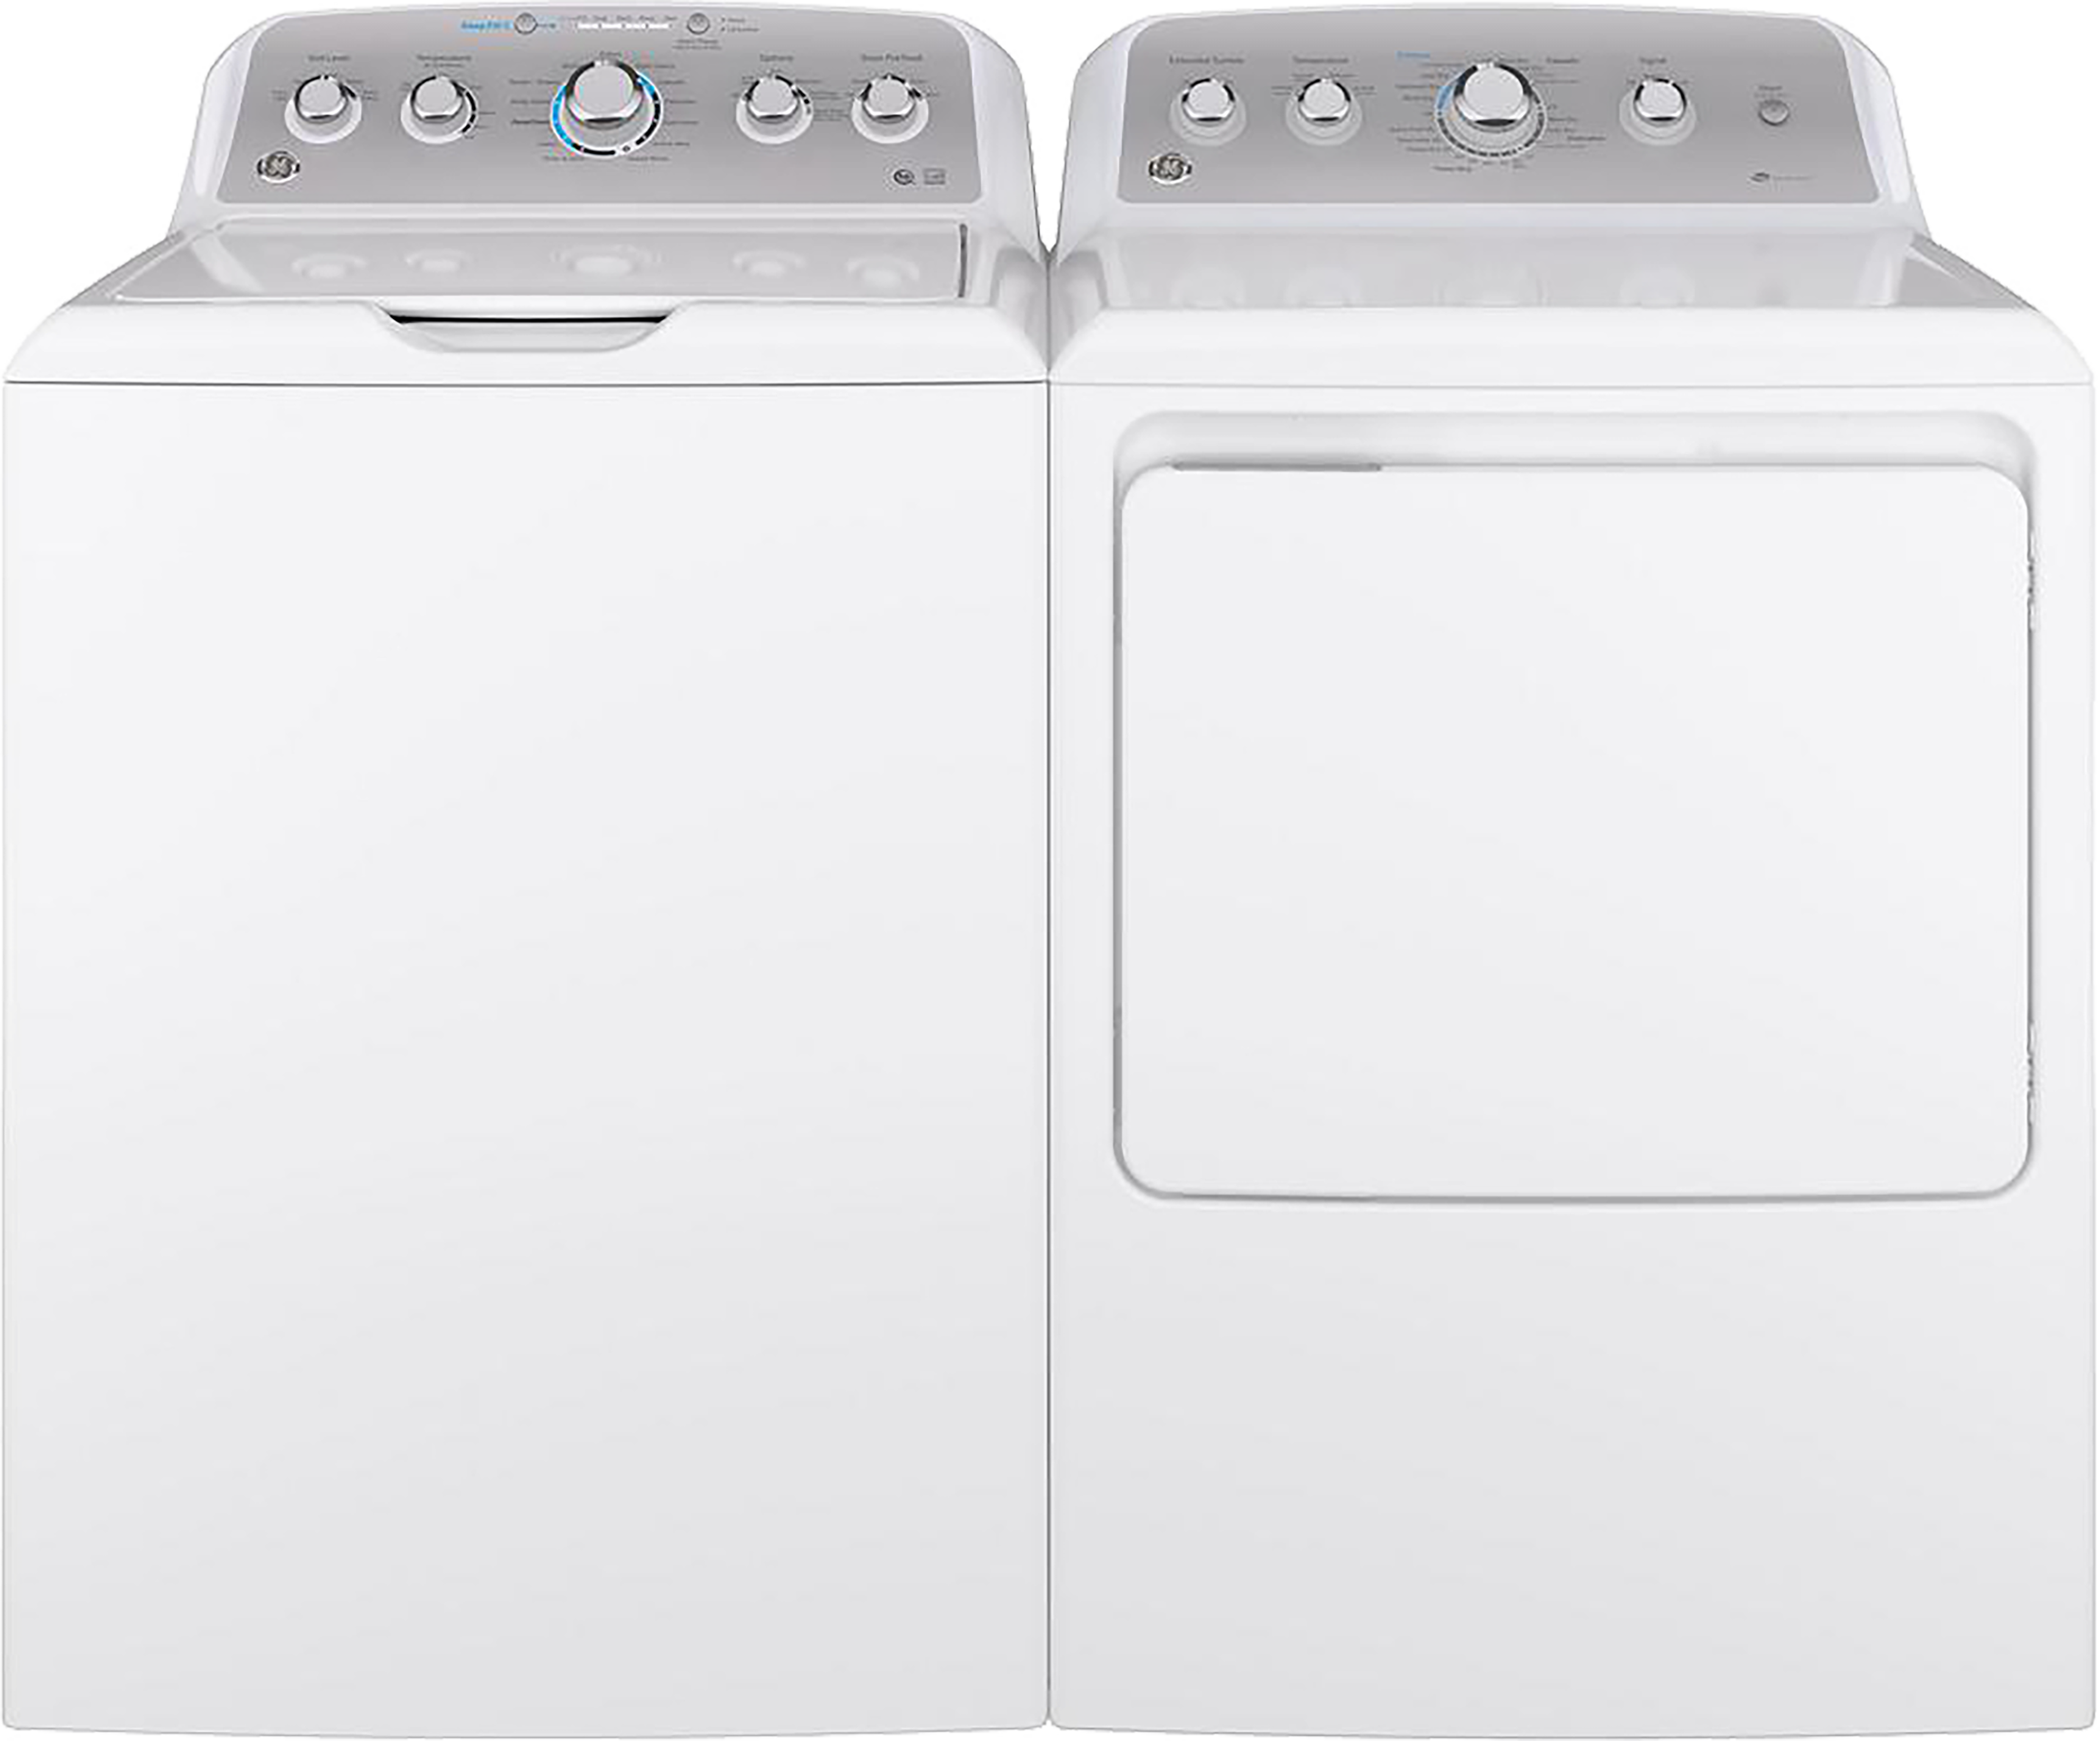 GE Top Load Pair With a 4.6 Cu Ft Washer and a 7.2 Cu Ft Electric Dryer